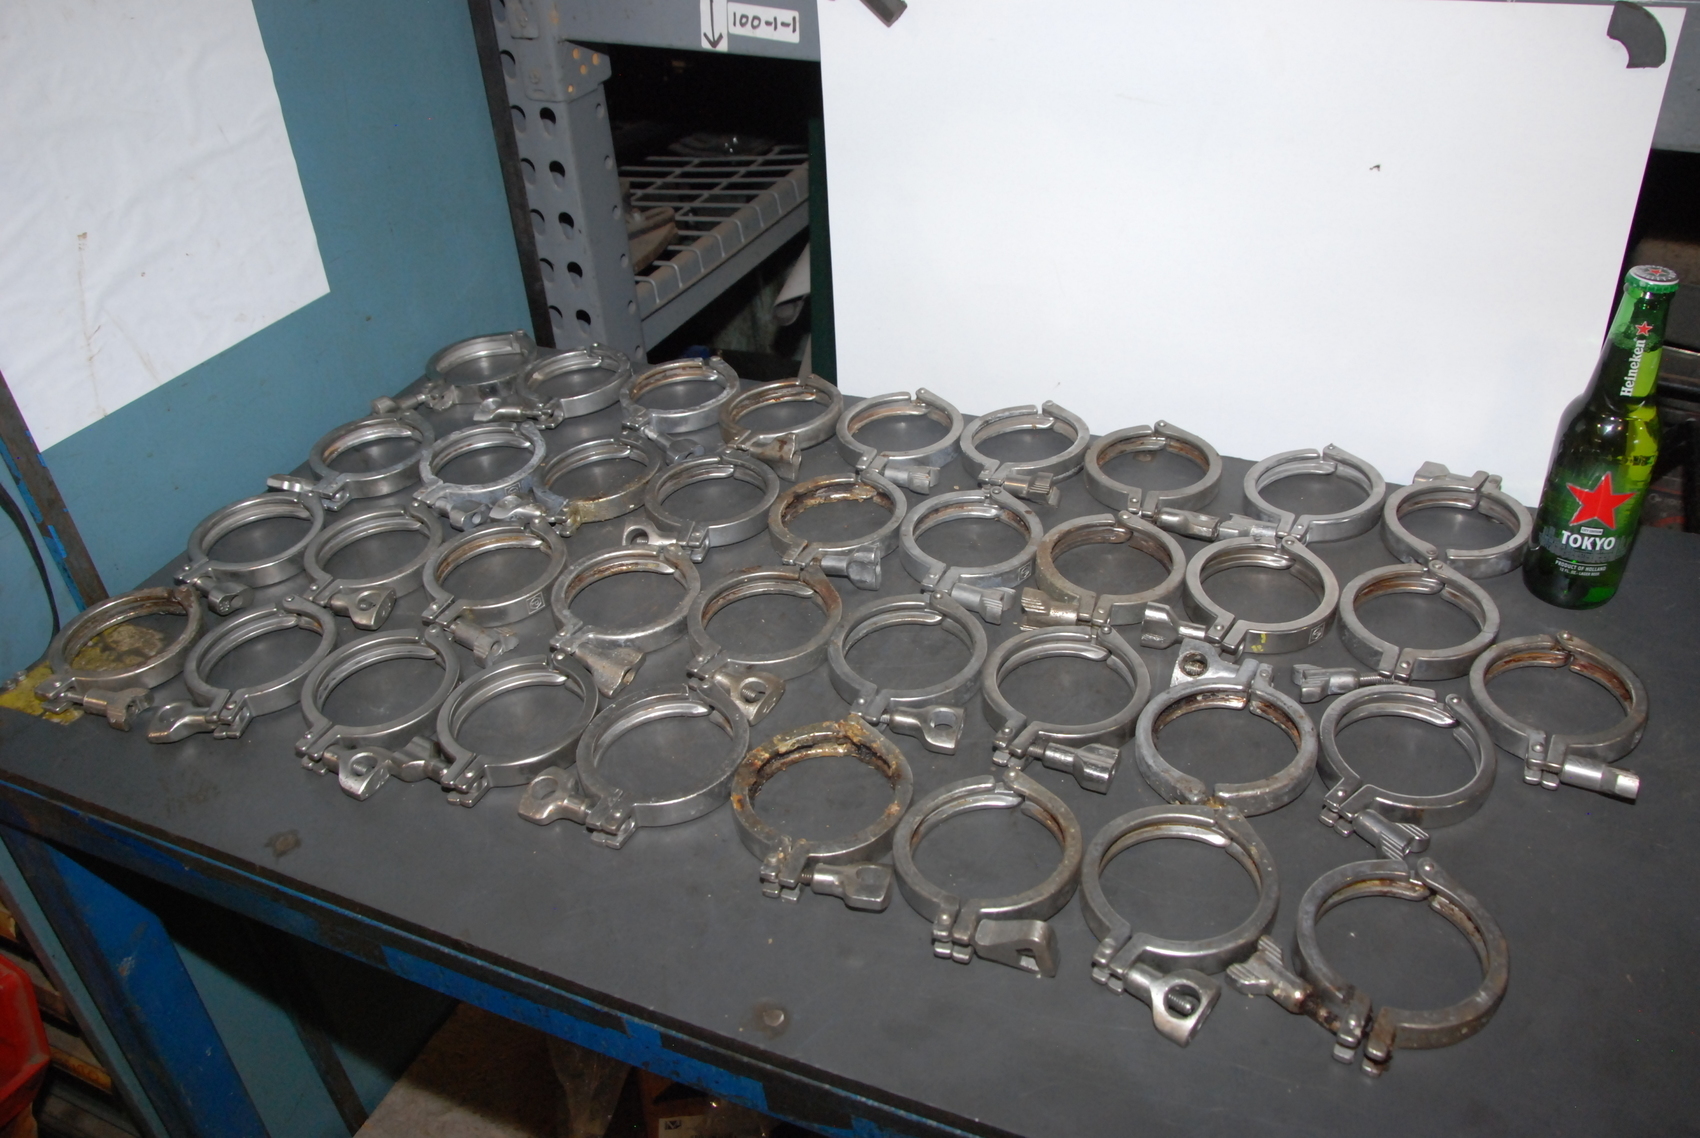 Lot of 37 3-7/32"Sanitary Stainless Steel pipe Clamps triclover etc